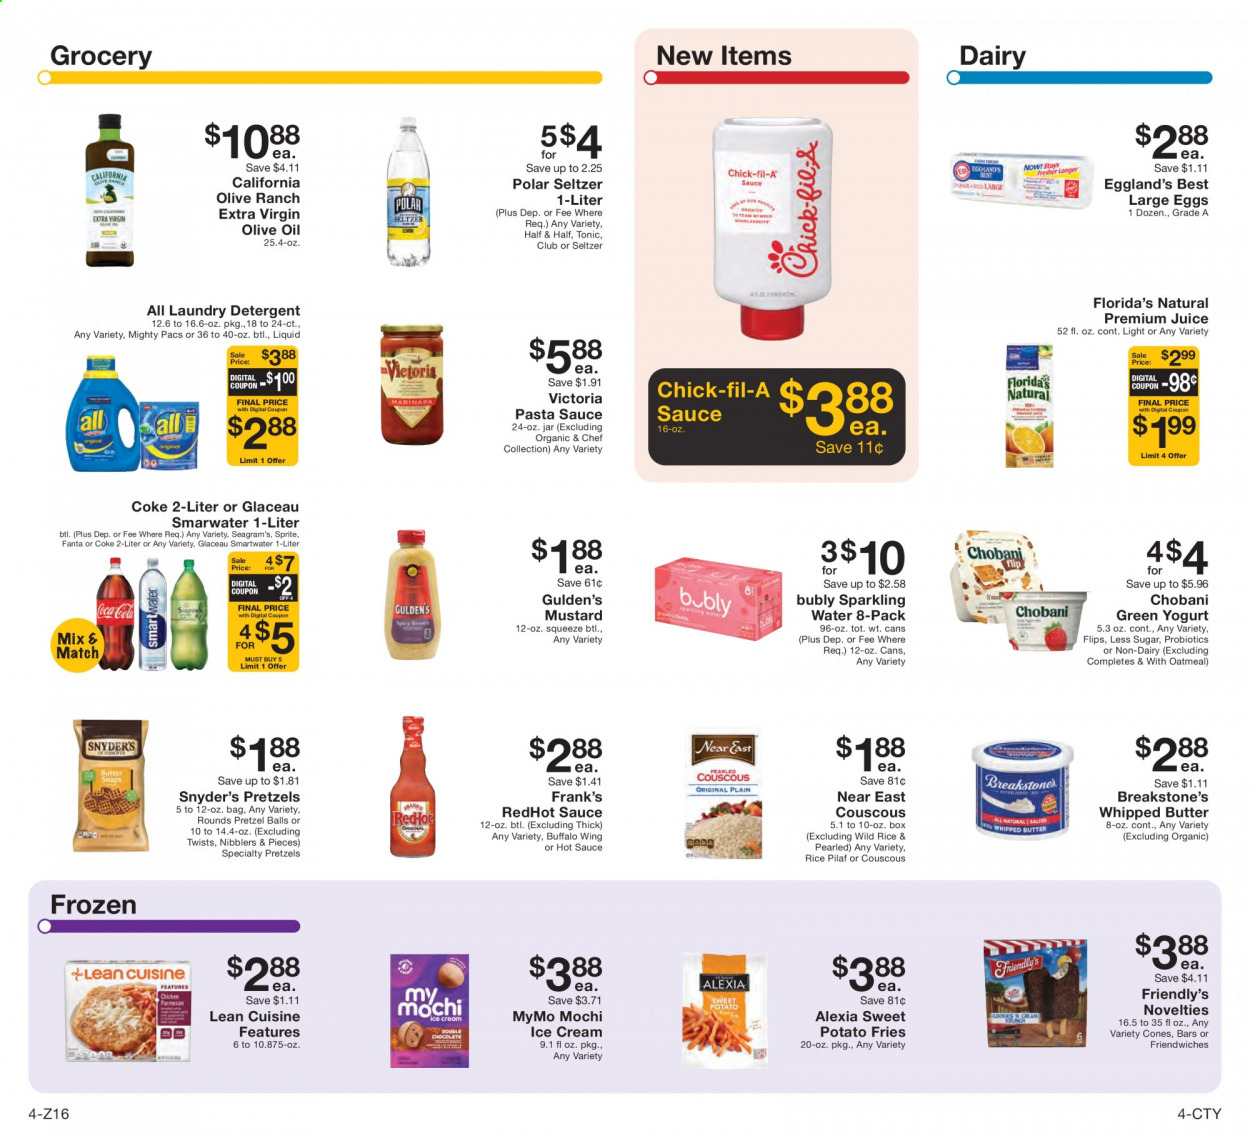 thumbnail - Fairway Market Flyer - 05/14/2021 - 05/20/2021 - Sales products - pretzels, dessert, sweet potato, pasta sauce, sauce, Lean Cuisine, Chobani, eggs, large eggs, whipped butter, ice cream, Friendly's Ice Cream, sweet potato fries, Florida's Natural, oatmeal, couscous, rice, mustard, hot sauce, wing sauce, extra virgin olive oil, olive oil, oil, Coca-Cola, Sprite, juice, Fanta, tonic, soft drink, Coke, seltzer water, sparkling water, bottled water, Smartwater, water, carbonated soft drink, Half and half. Page 4.